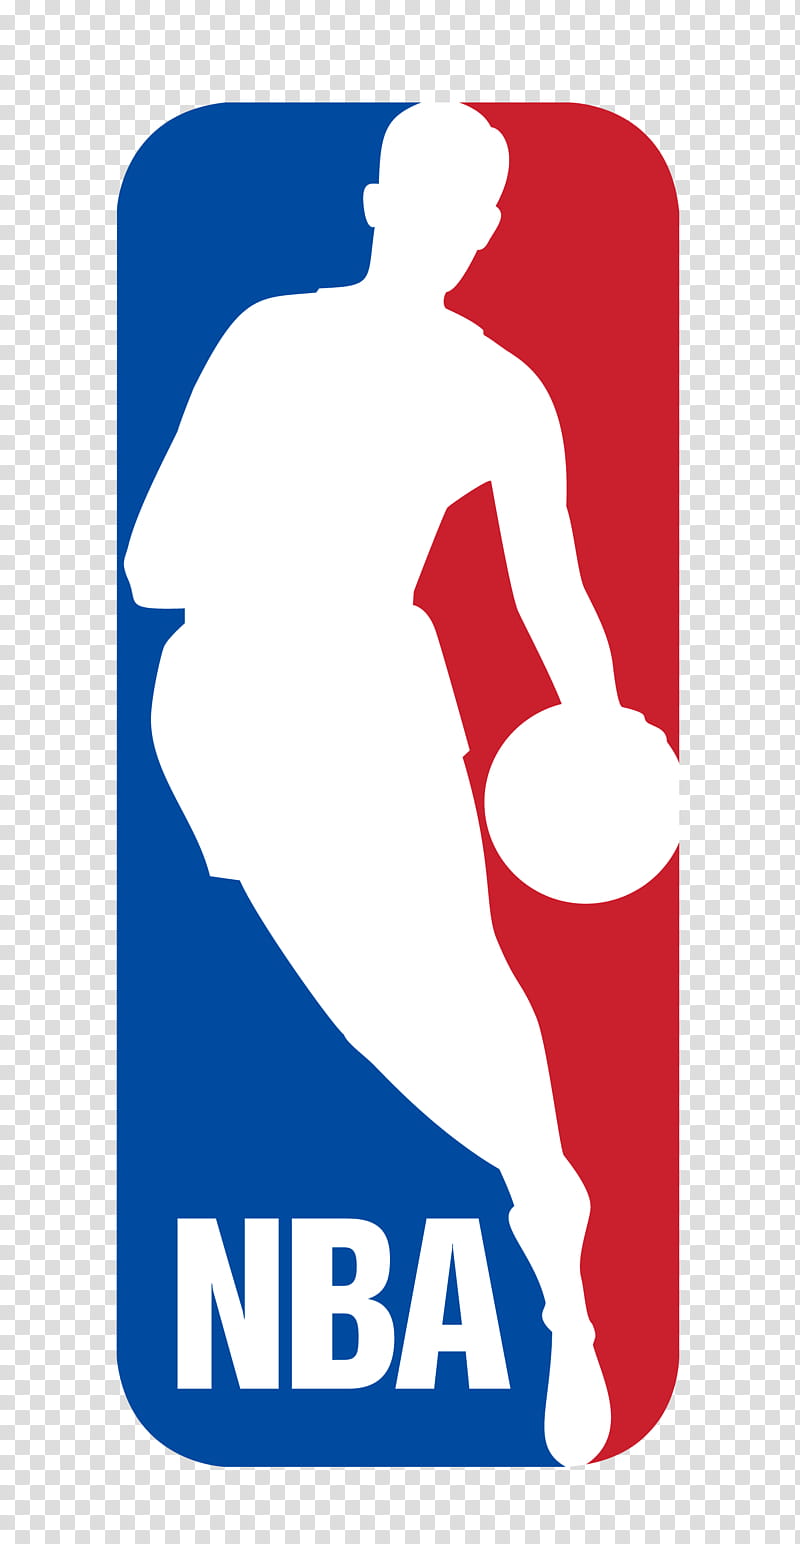 Basketball Logo, Denver Nuggets, Los Angeles Lakers, United States Of America, National Basketball Players Association, Nba, Malik Beasley, Jerry West transparent background PNG clipart